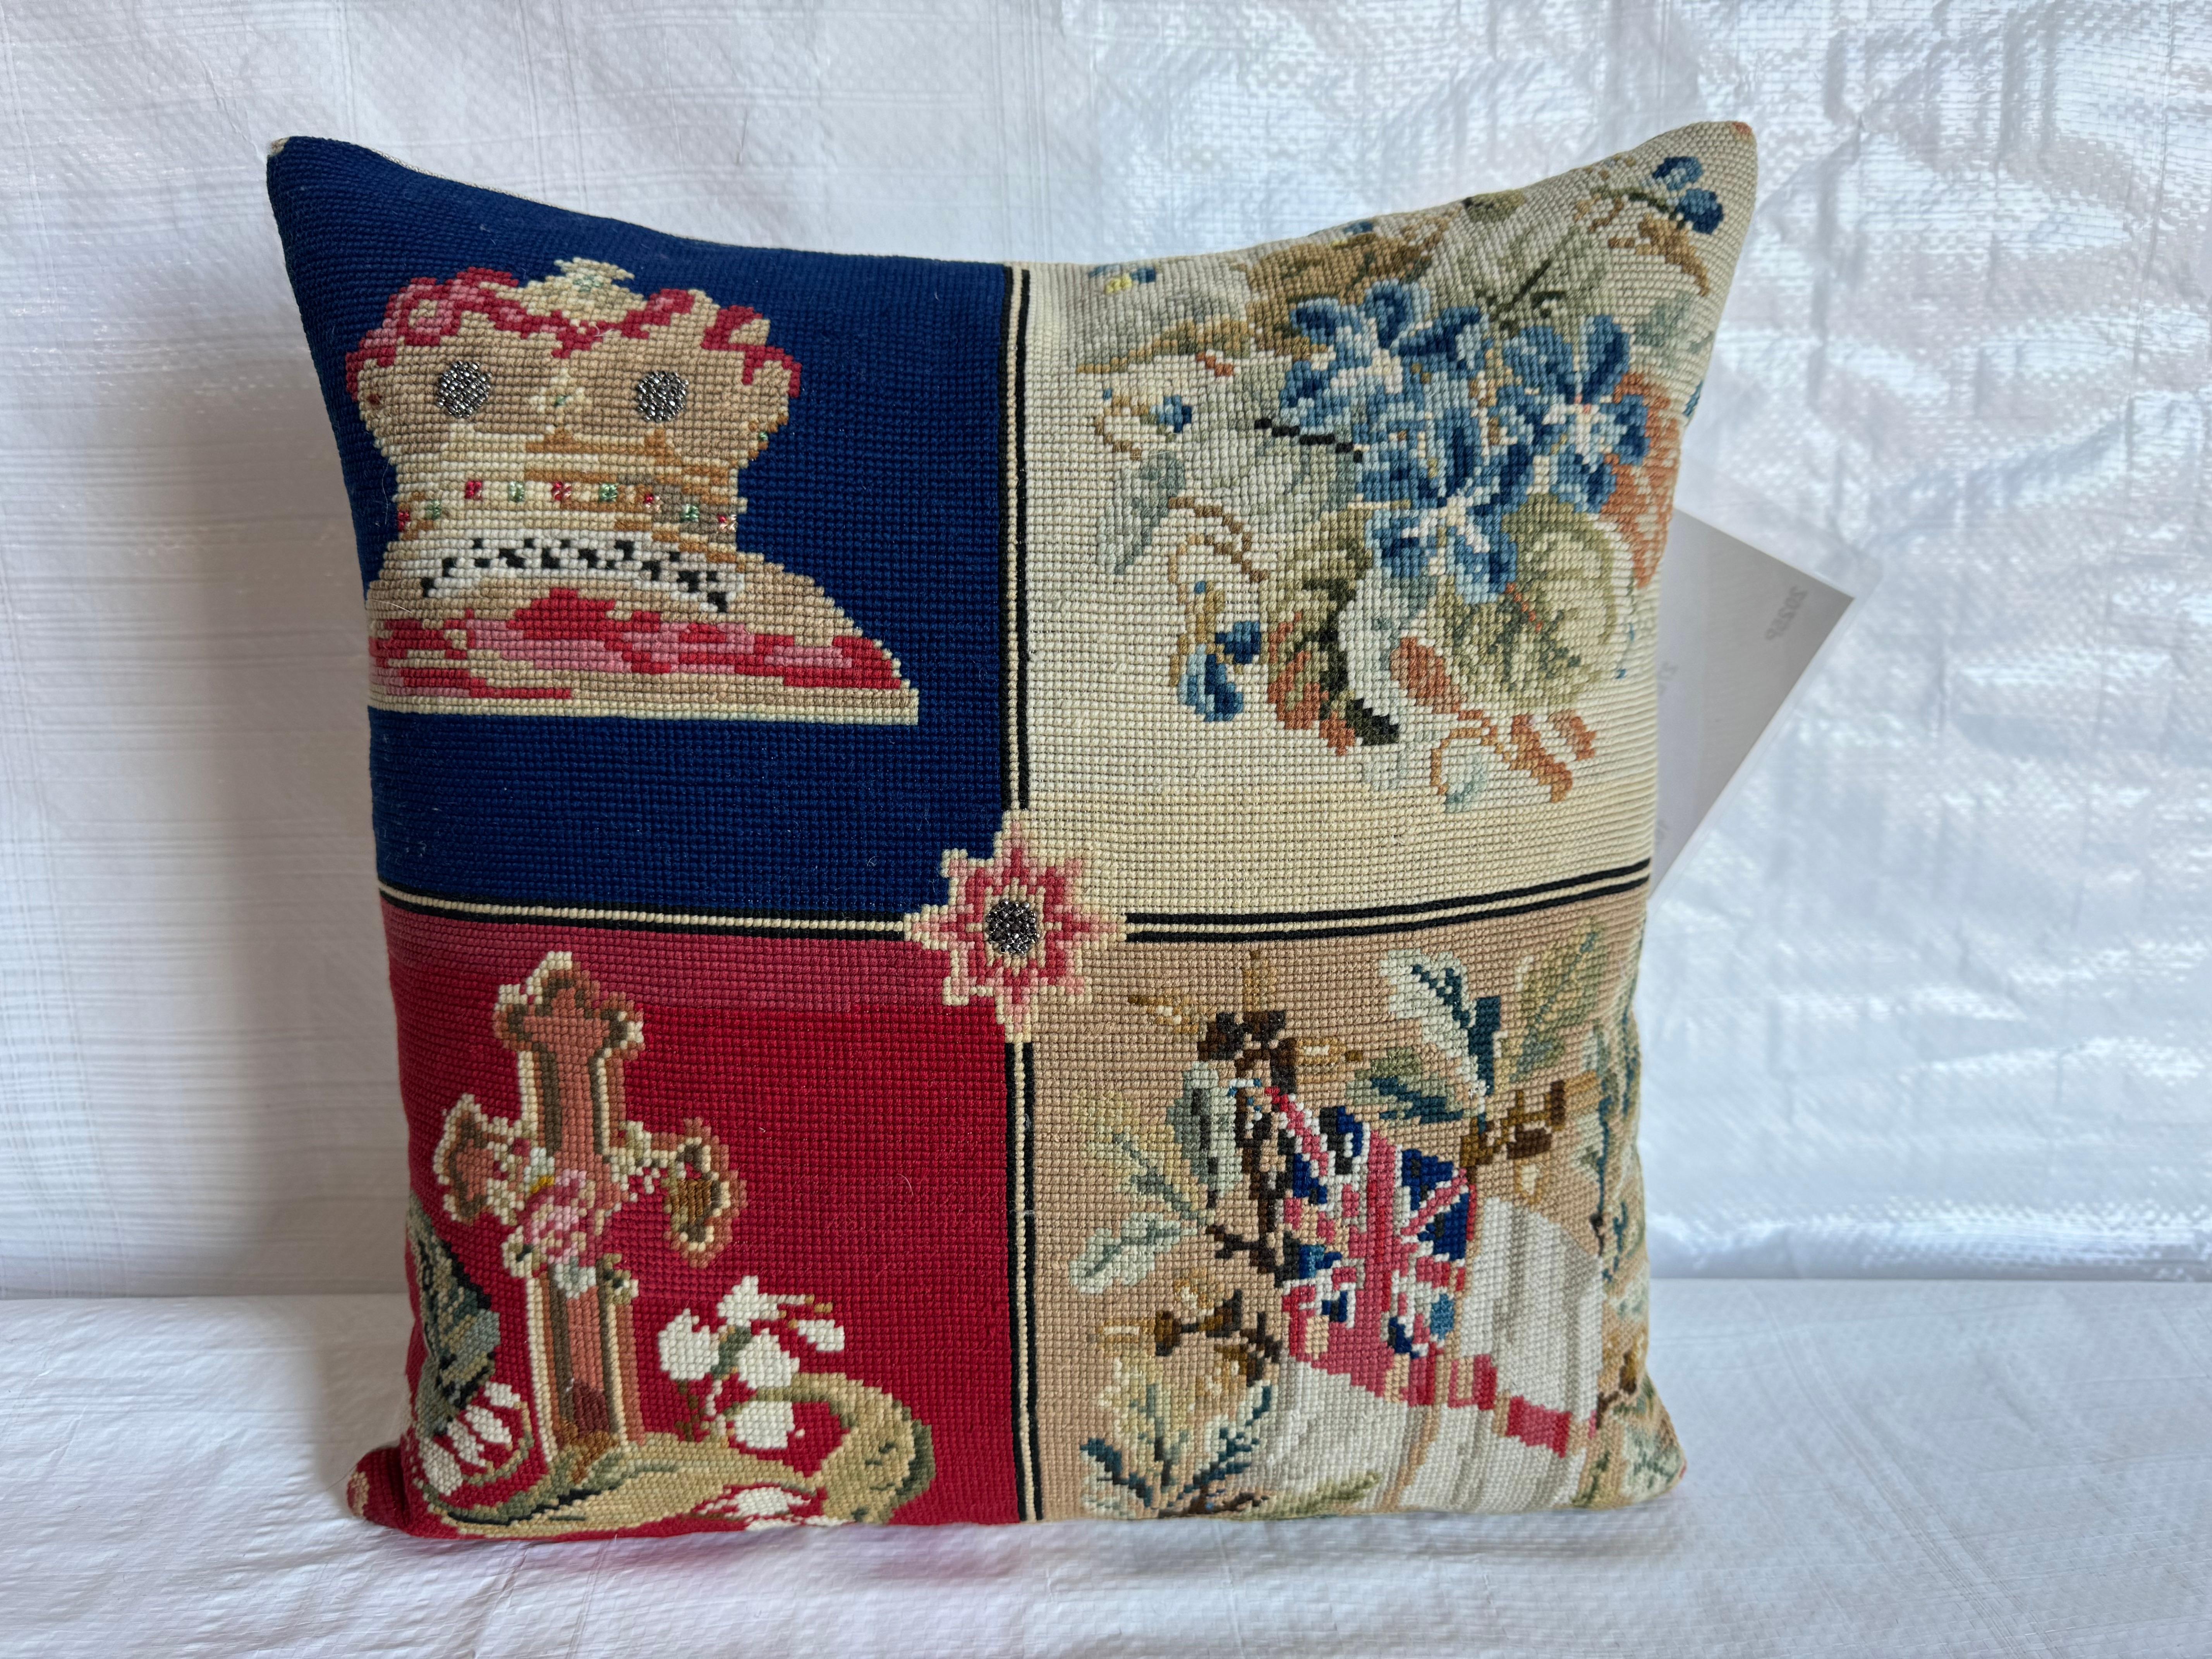 Immerse your space in elegance with the English Needlework Pillow, sized at 16